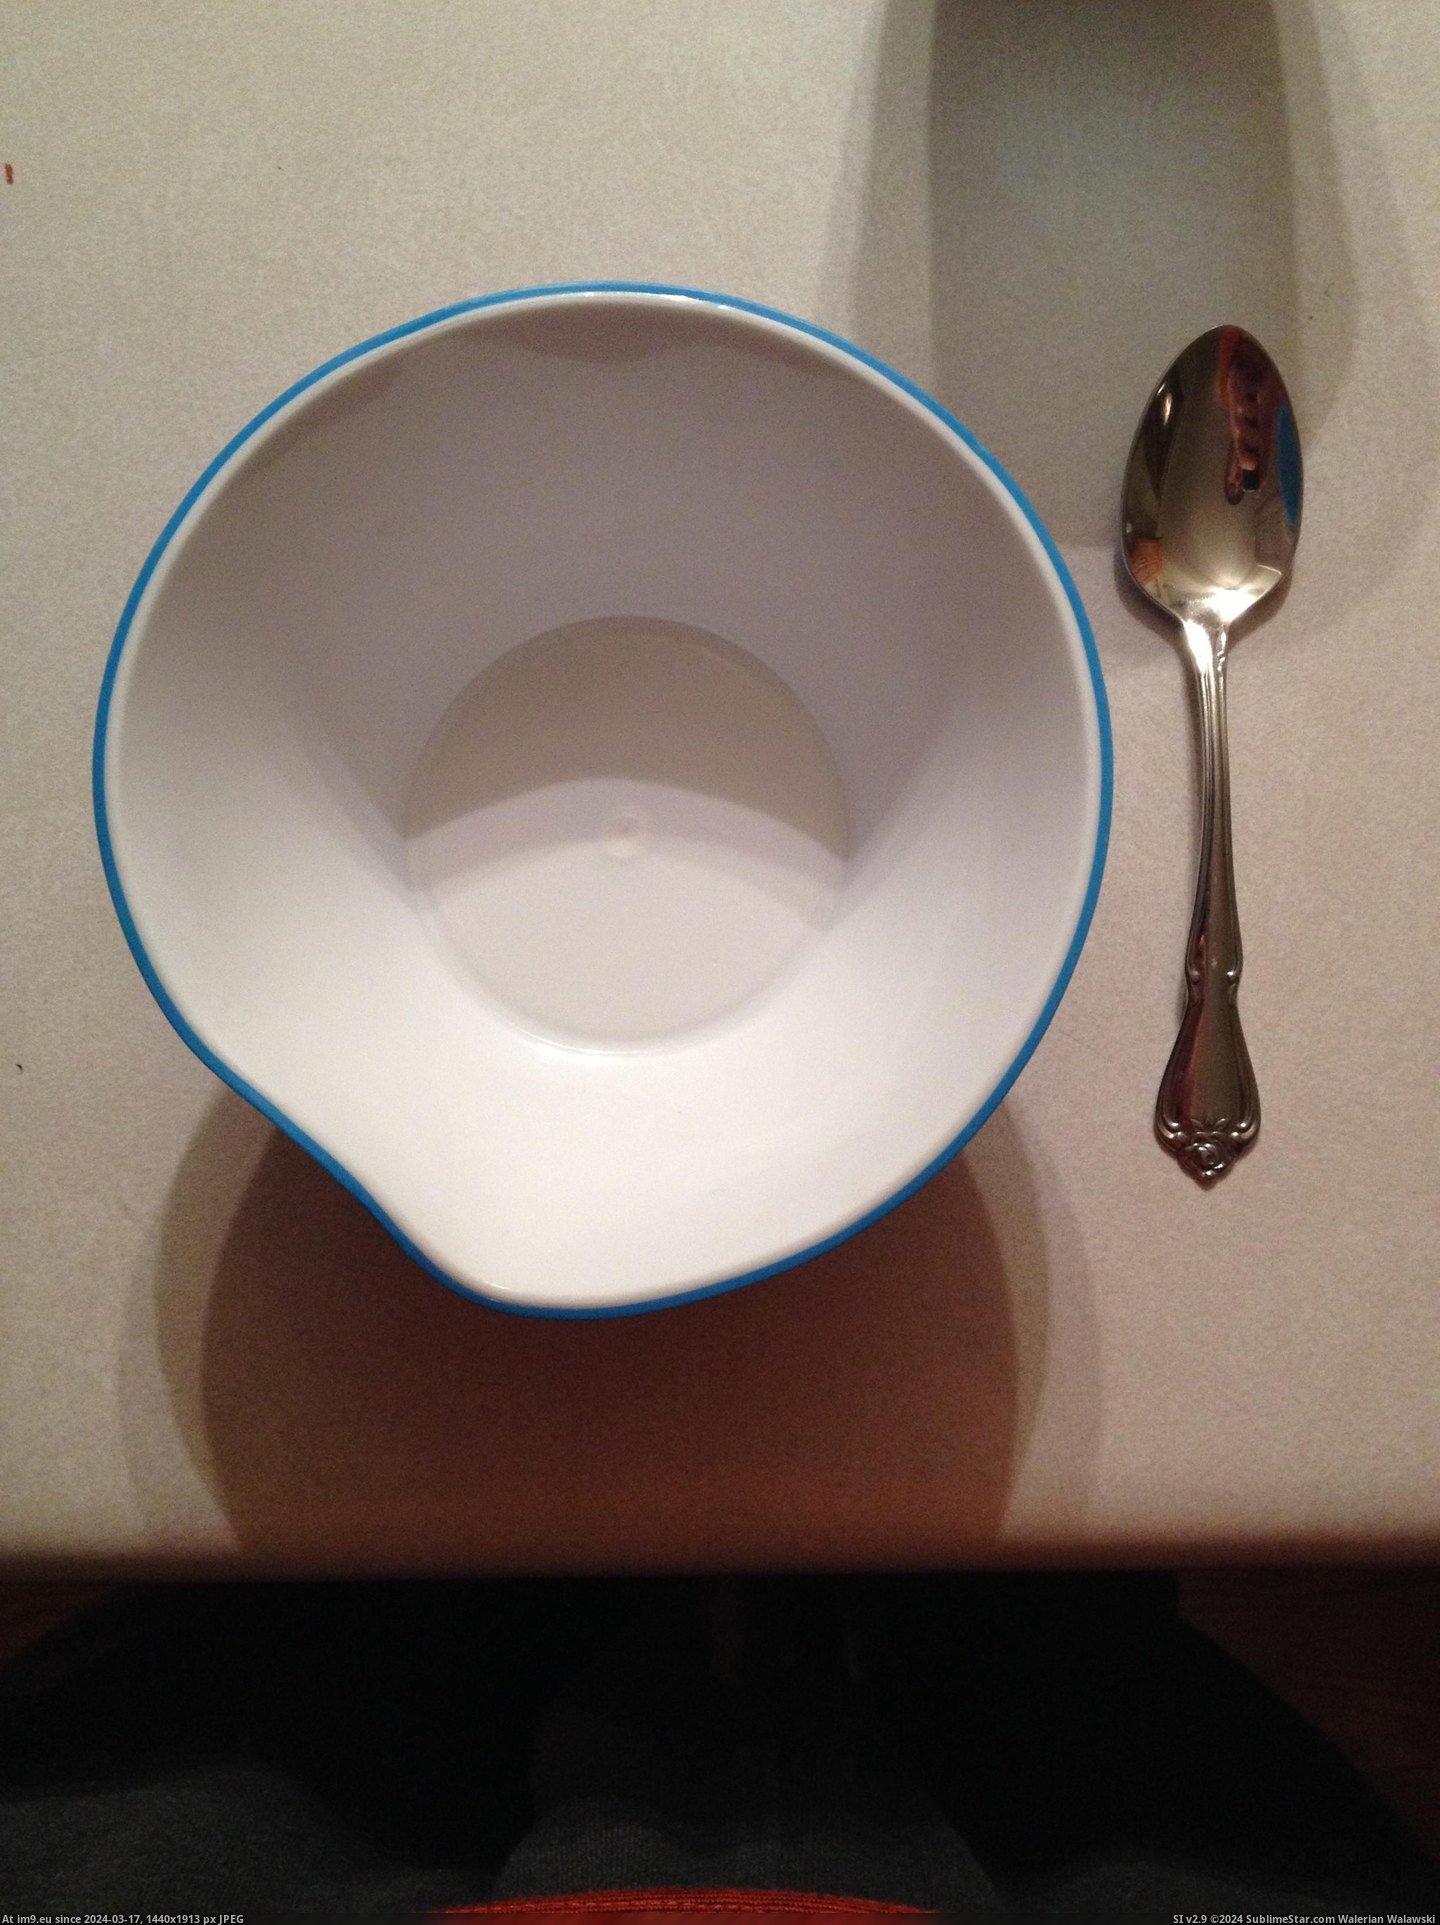 #Was #Perfect #Bowl #Spot #Circular #Sipping #Reformed #Shape #Cereal #Soo #Dishwasher [Mildlyinteresting] Soo my cereal bowl, normally circular in shape, was reformed by my dishwasher to make a perfect sipping spot Pic. (Obraz z album My r/MILDLYINTERESTING favs))